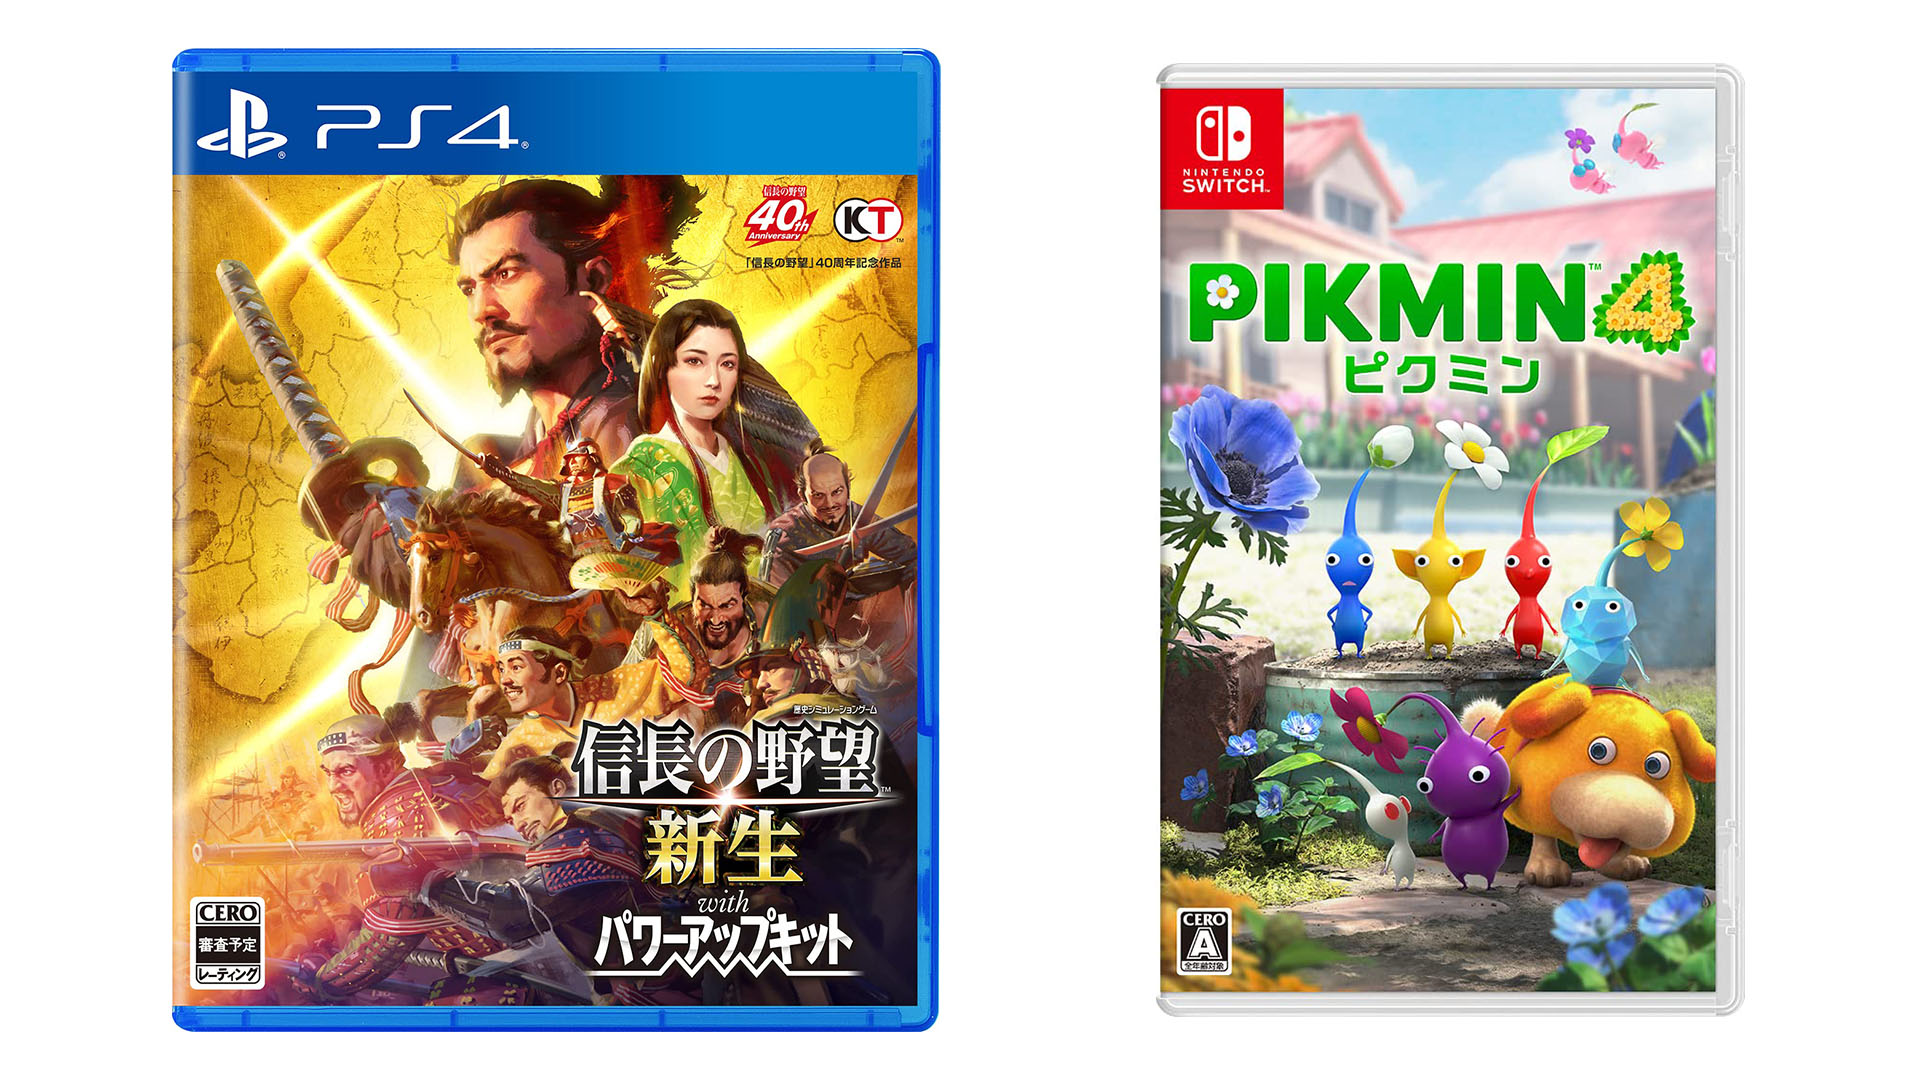 This Week's Japanese Game Releases: Pikmin 4, Nobunaga's Ambition